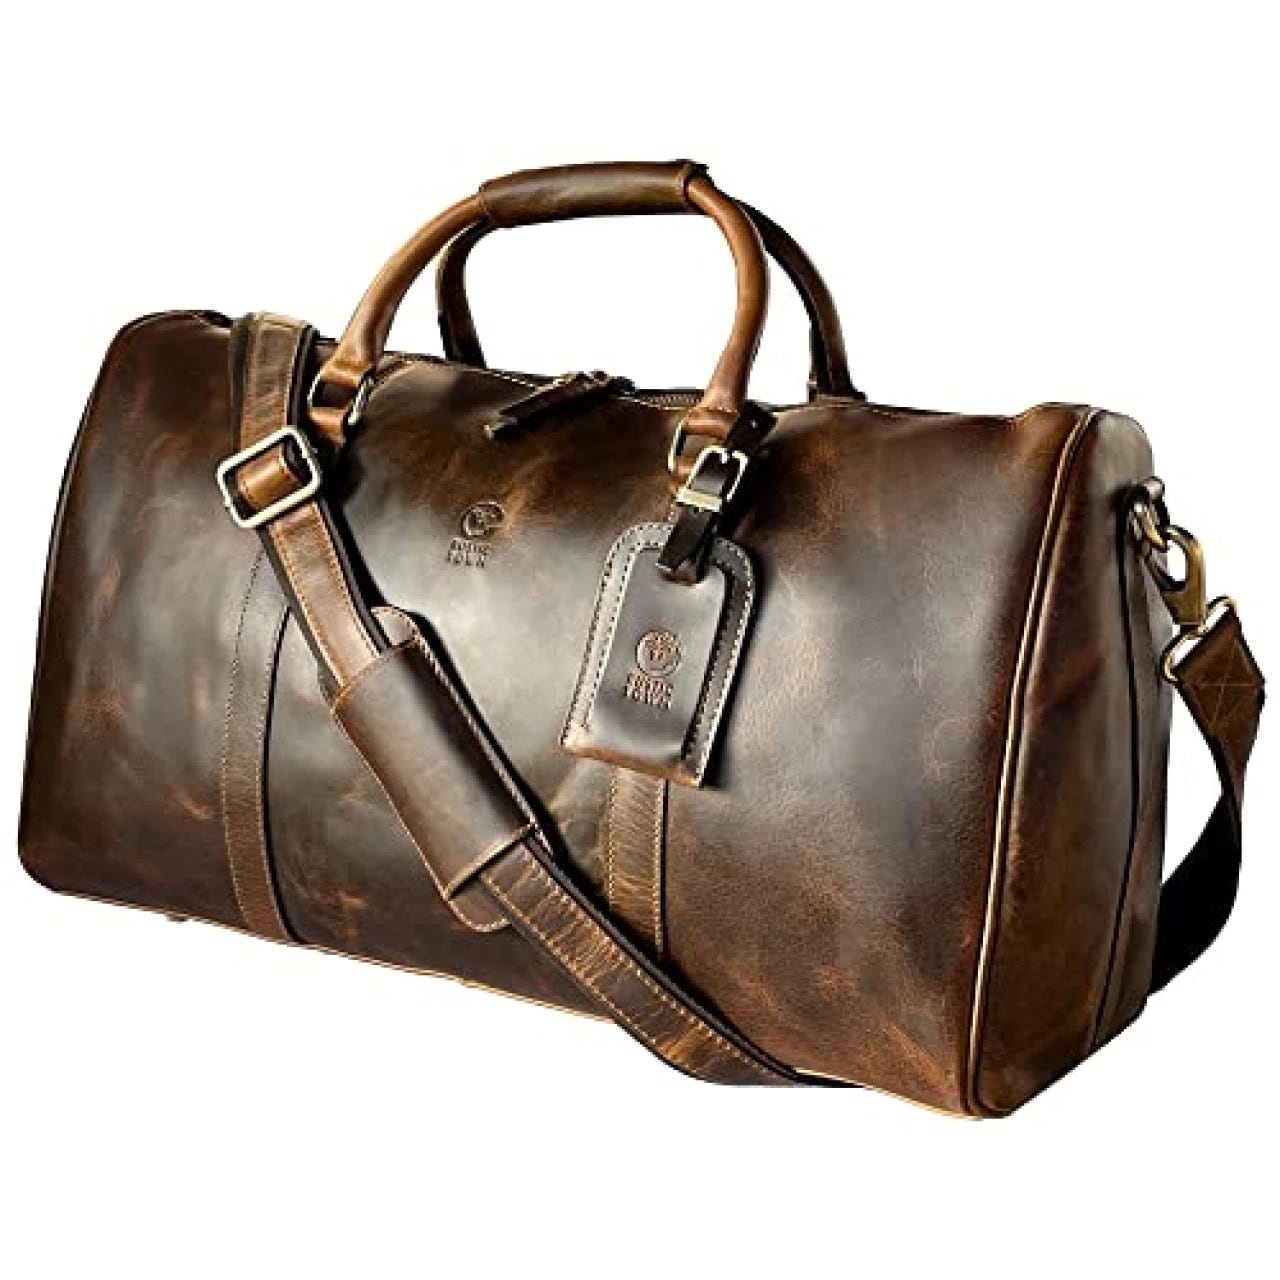 Leather Duffel Bag Travel Gym Sports Overnight Weekend Cabin Holdall by Komalc